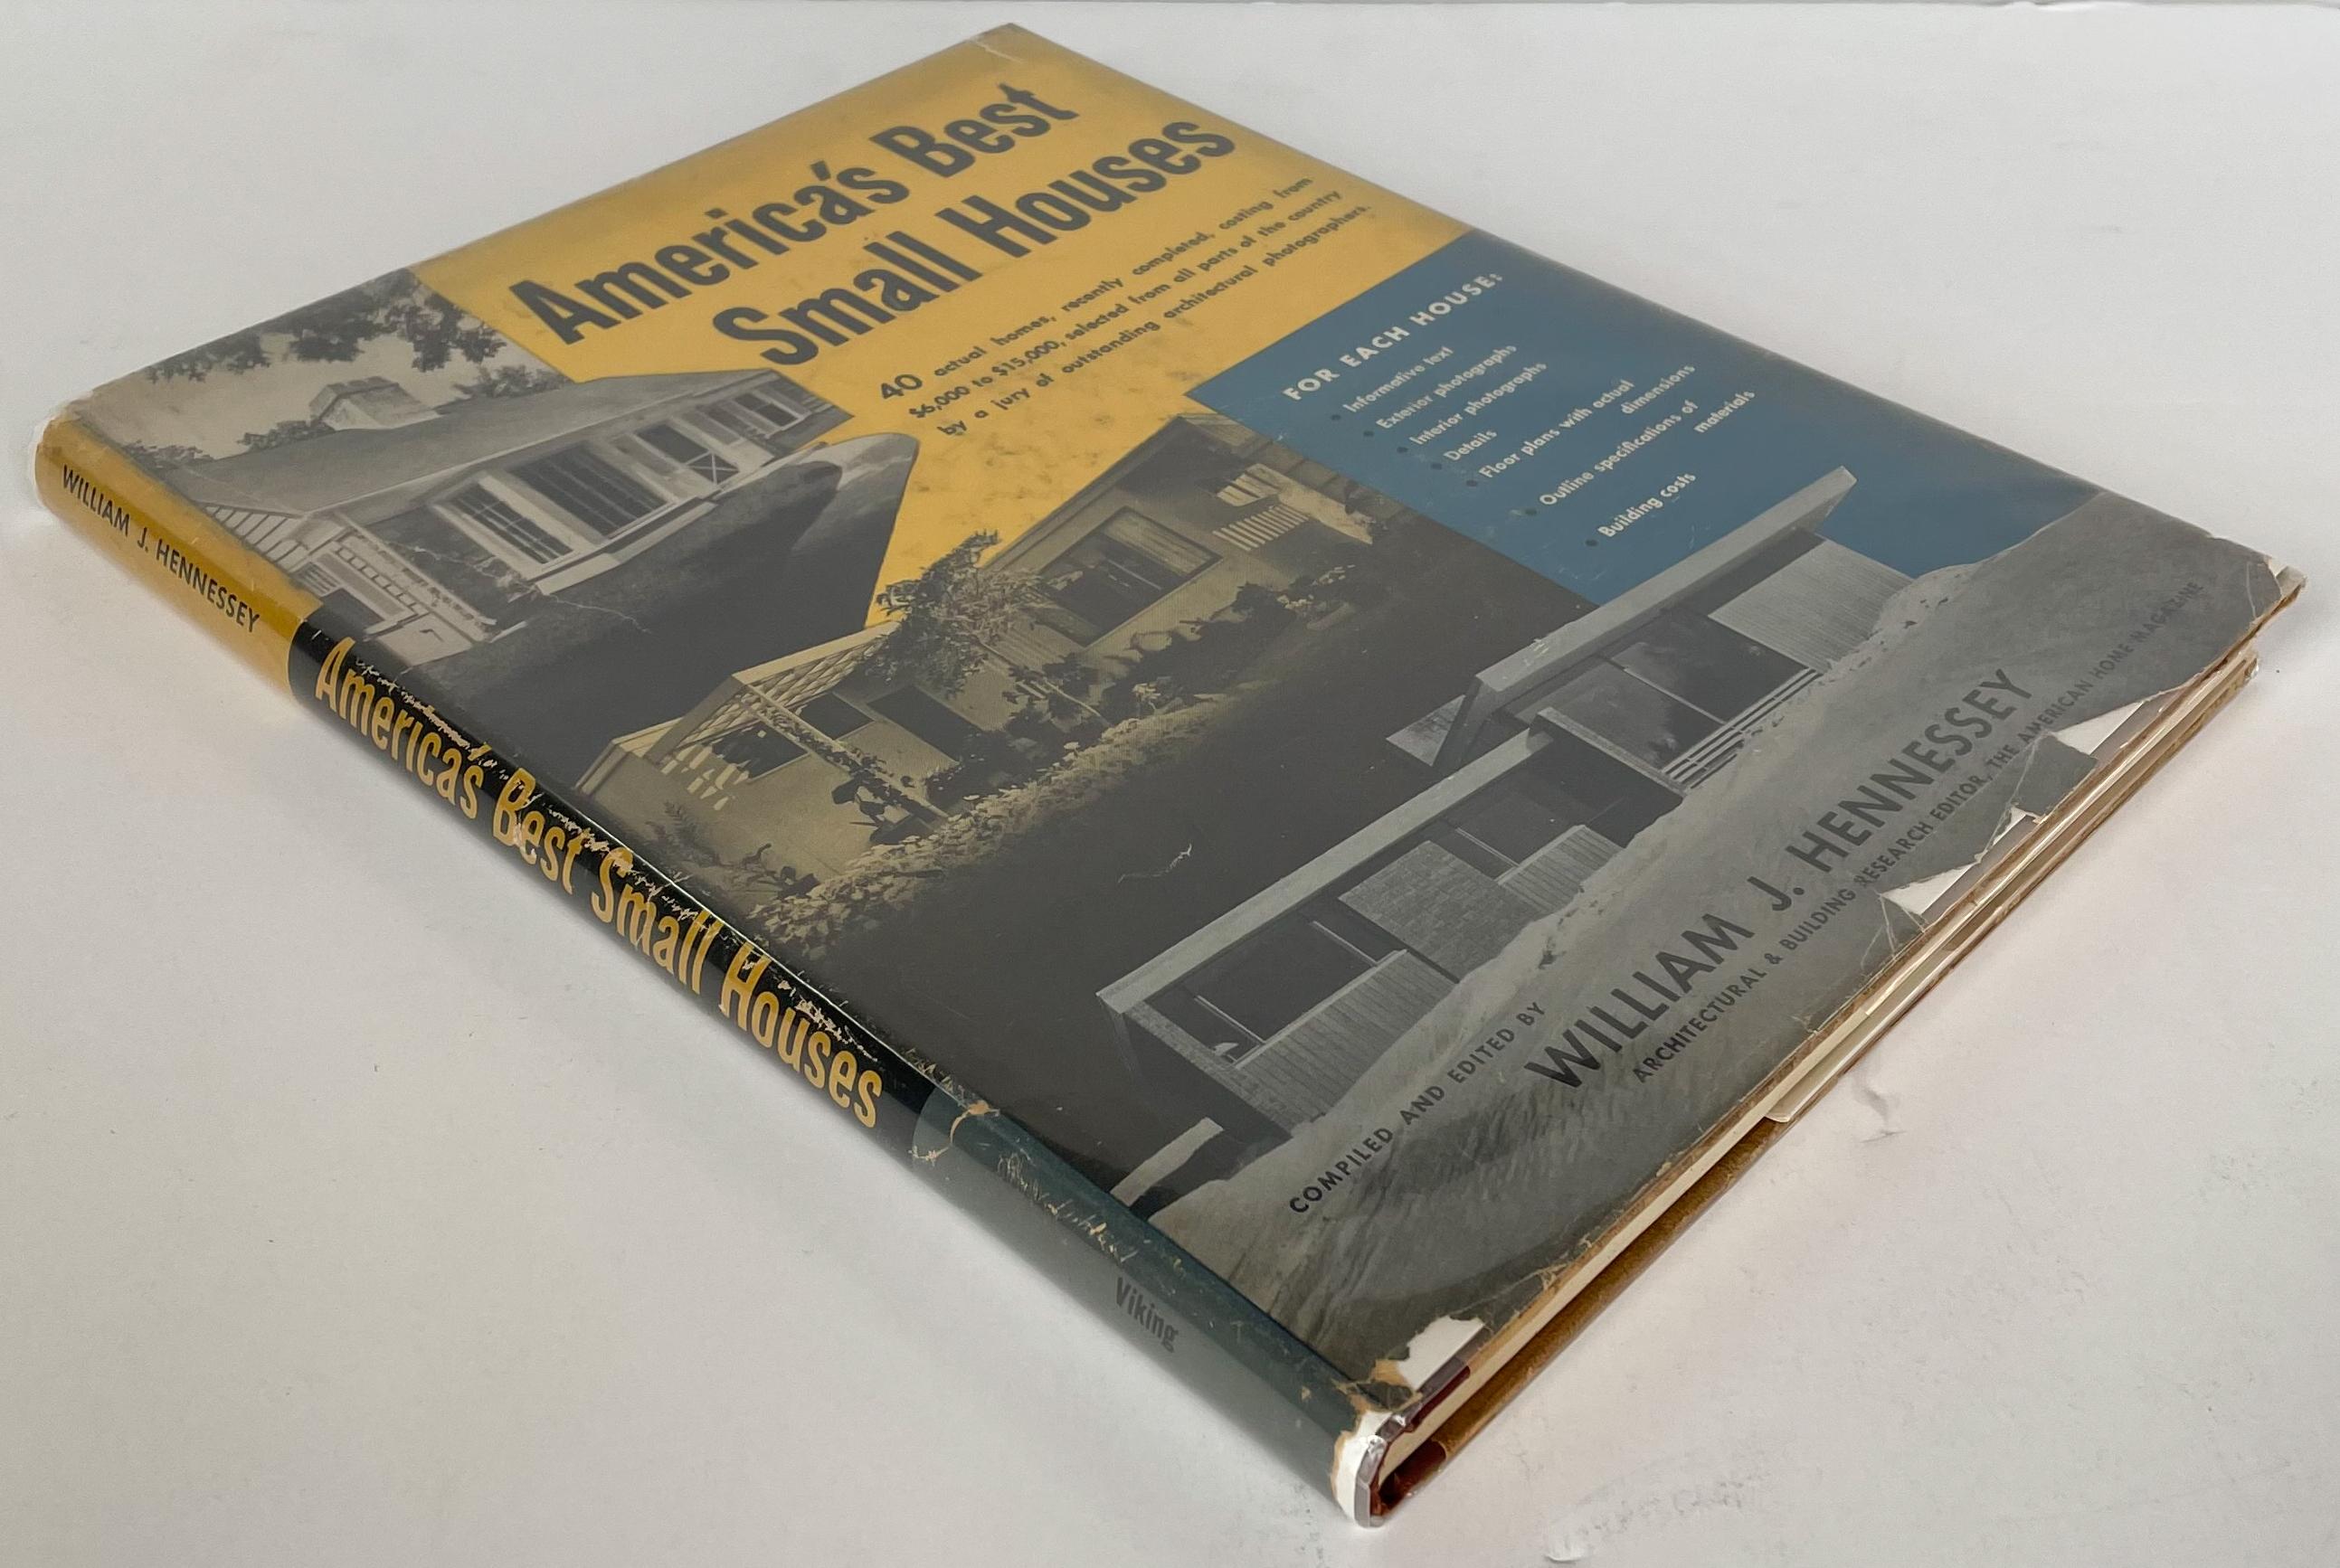 1949 survey of small modernist houses in America, compiled and edited by William J. Hennessey based on selections by a jury of architectural photographers including Richard Garrison, Fred Gund, P.A. Dearborn, and Julius Shulman. Hardcover 4to, 196